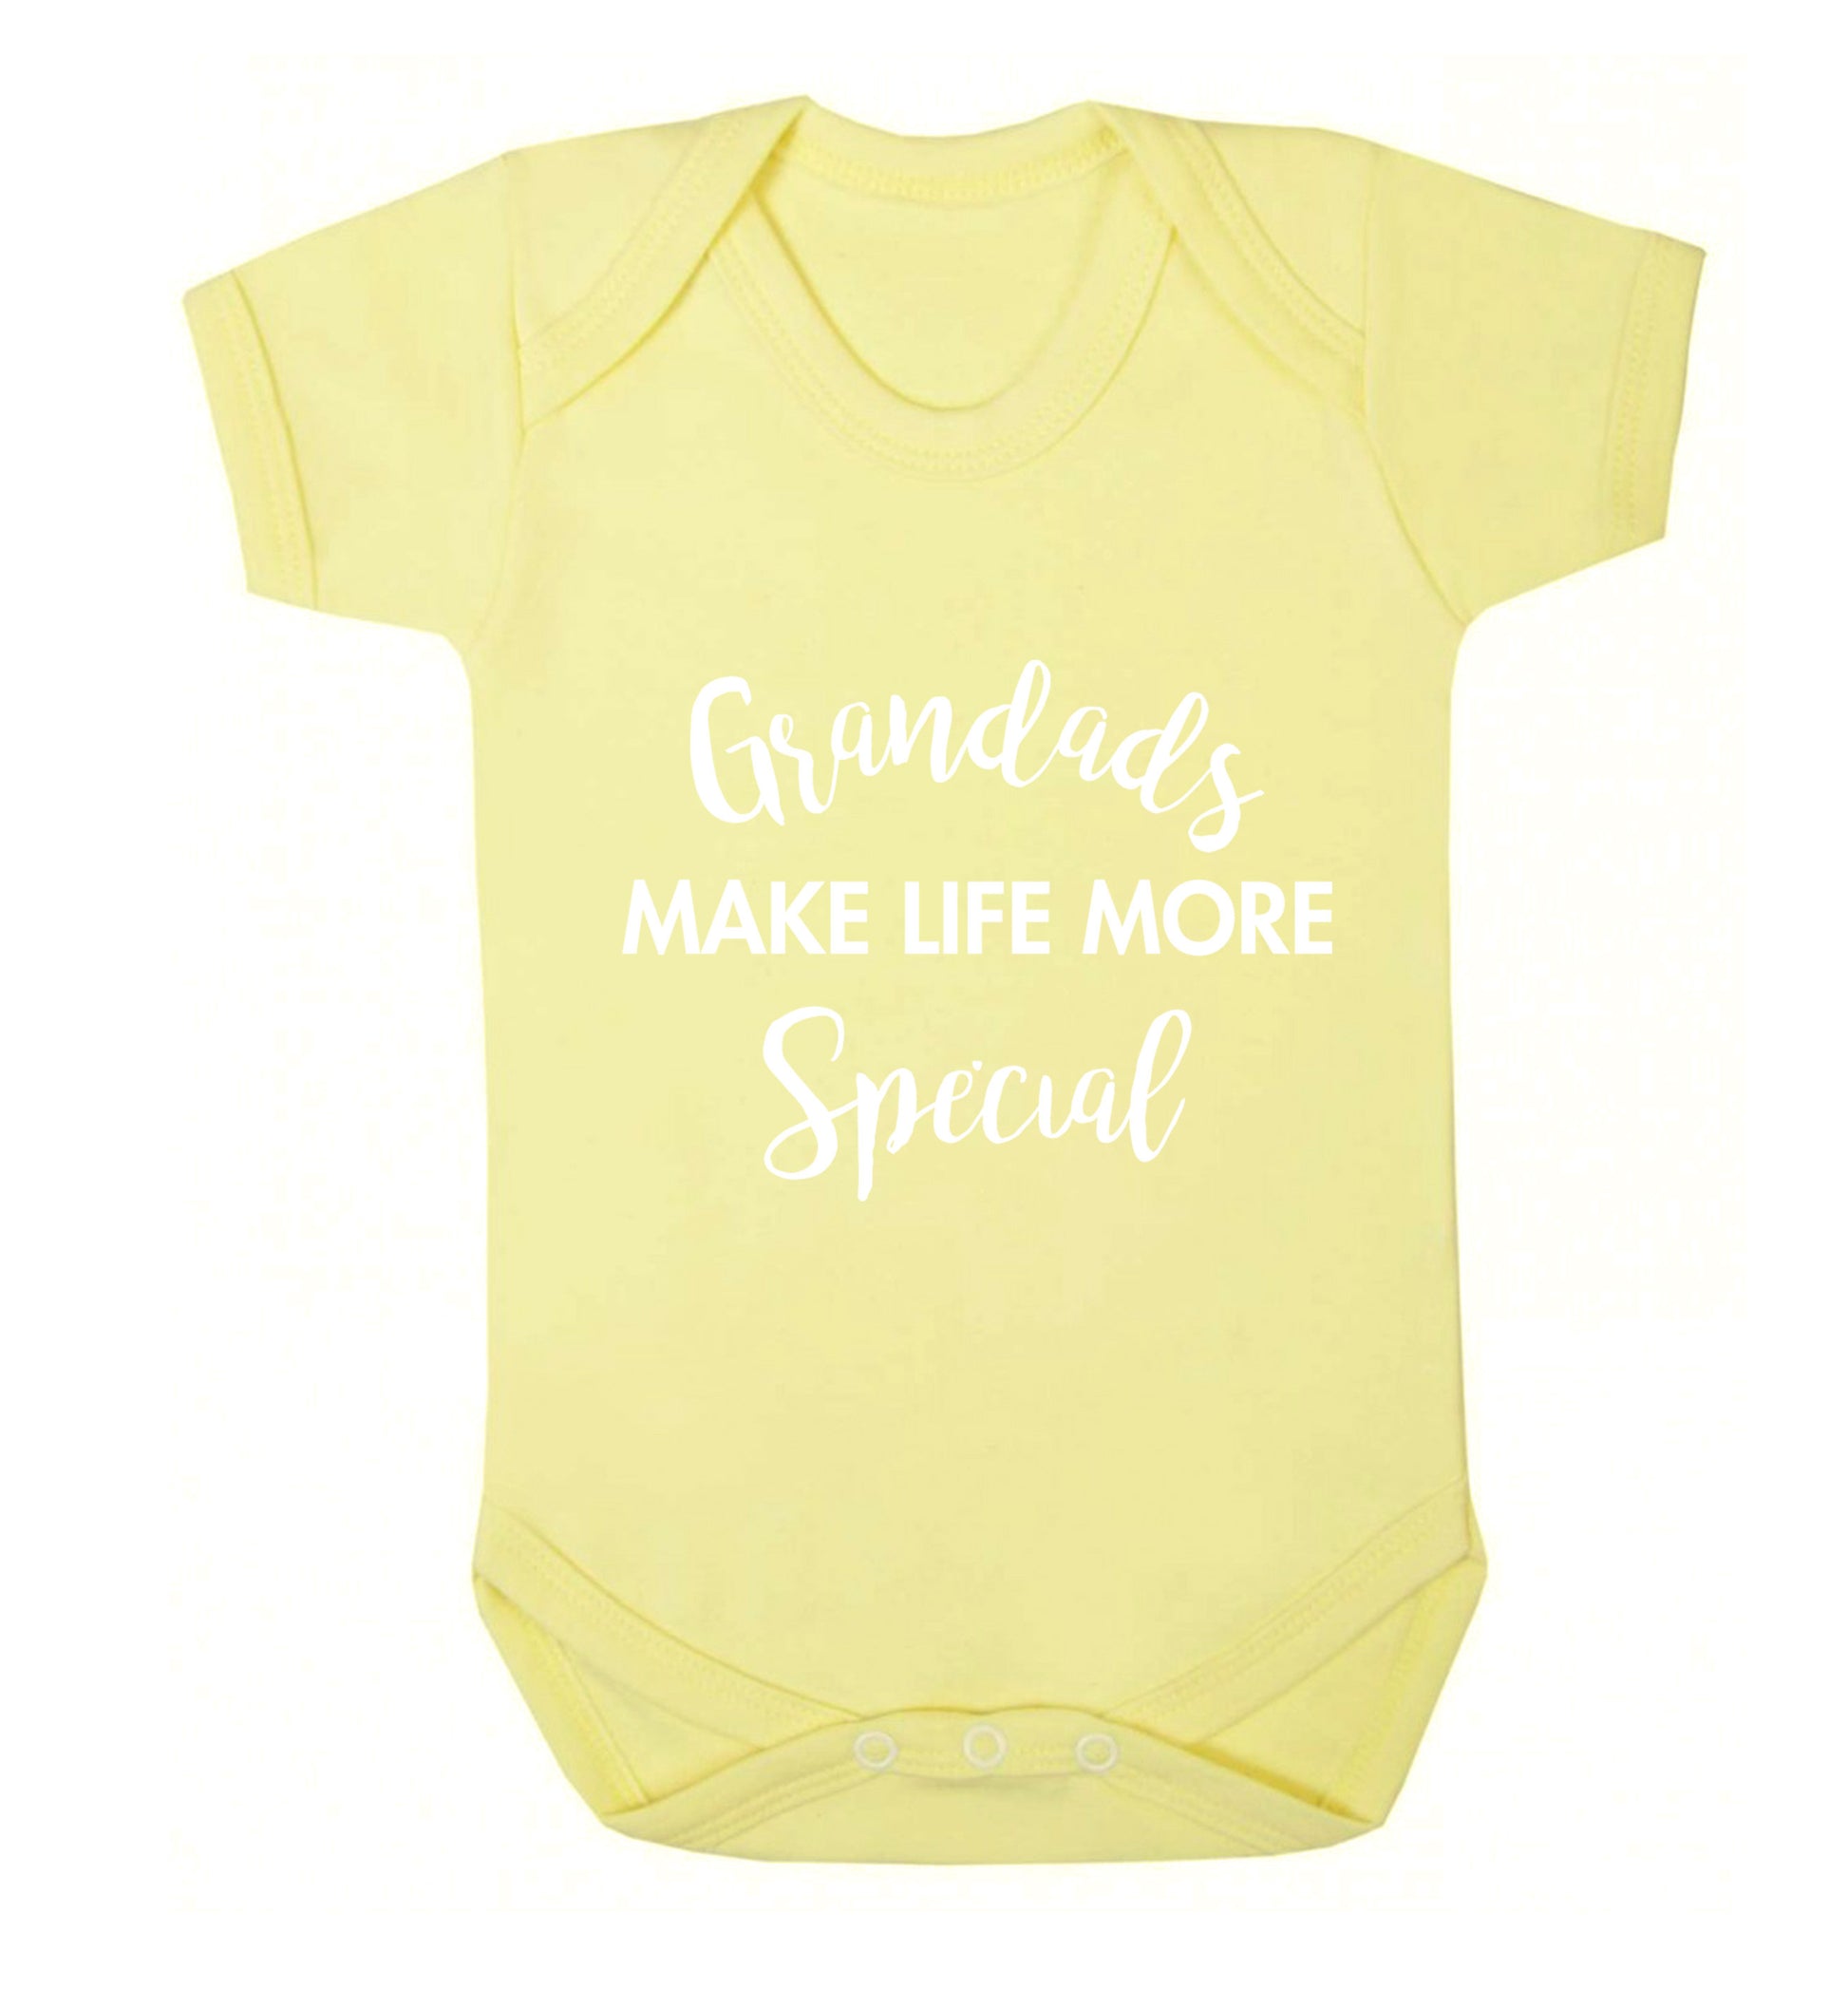 Grandads make life more special Baby Vest pale yellow 18-24 months